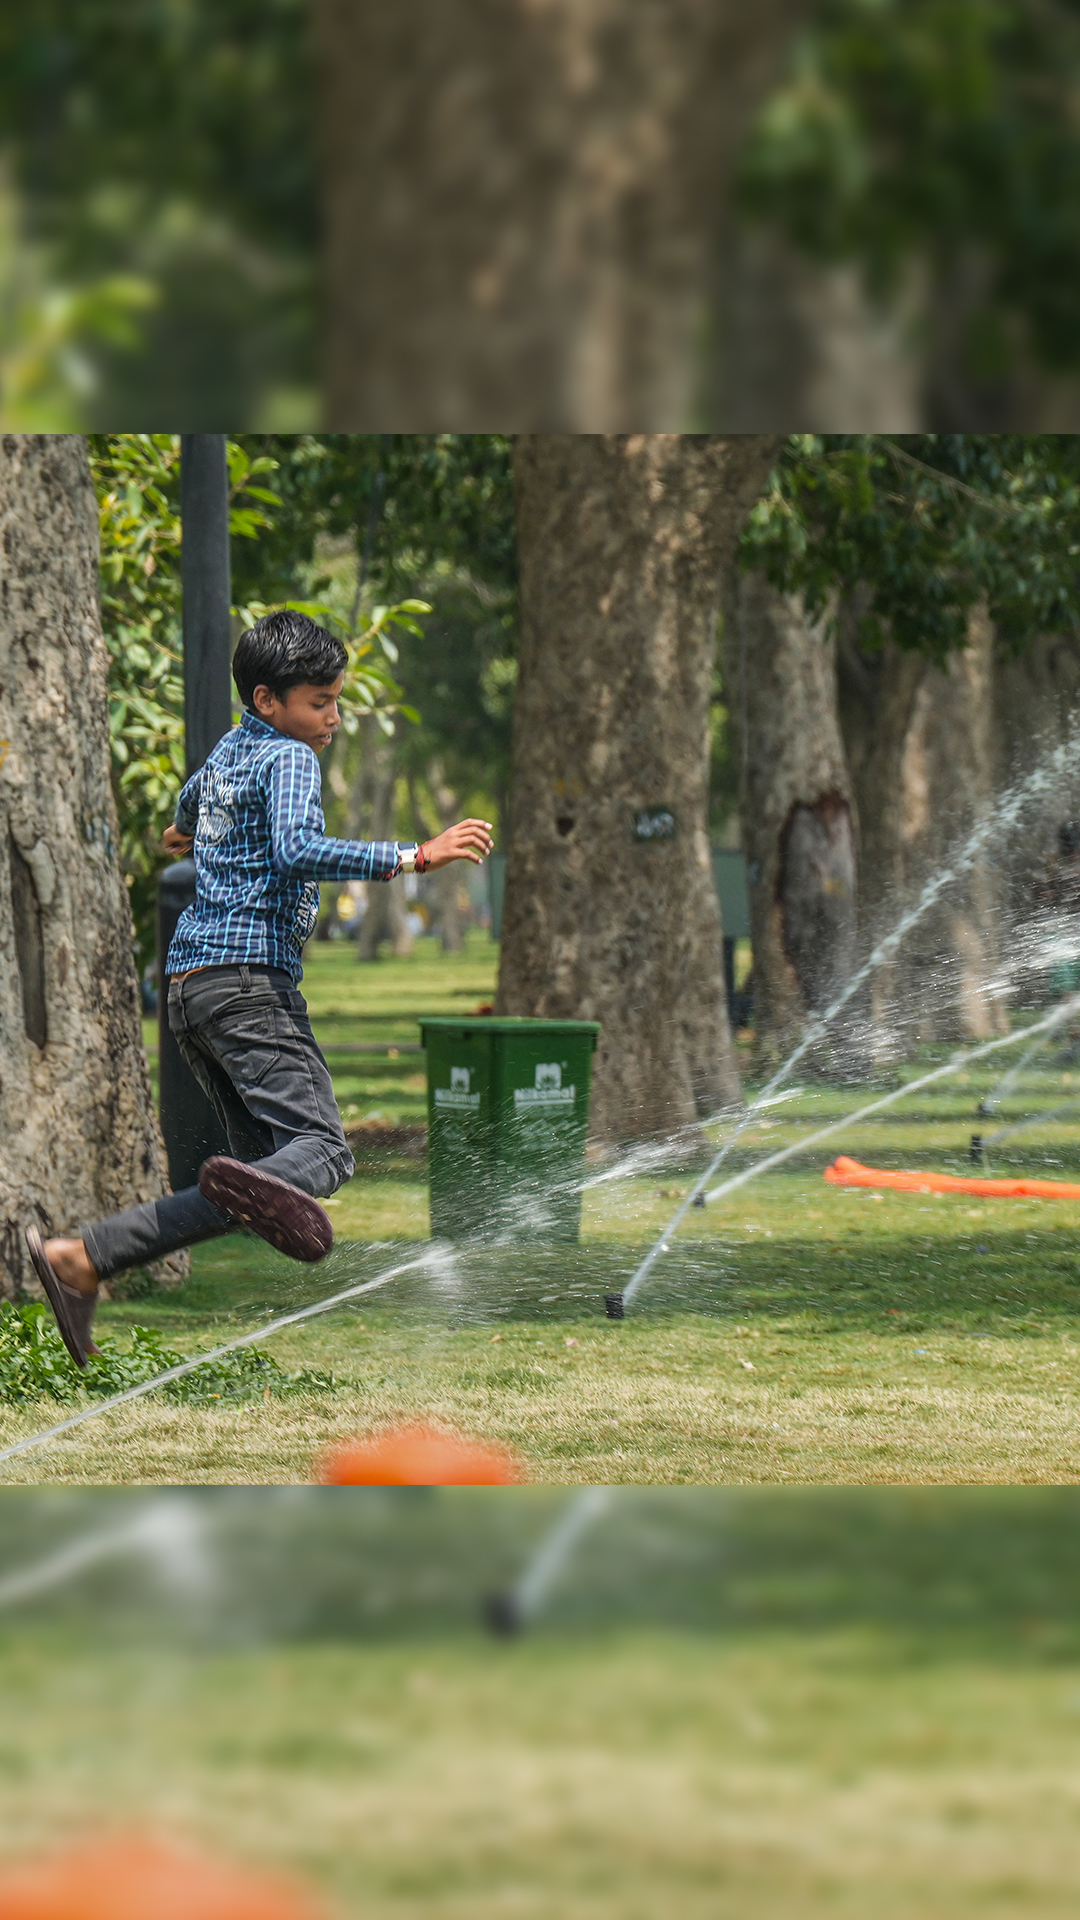 A boy plays near water fountains at an India Gate lawn during hot summer afternoon in New Delhi